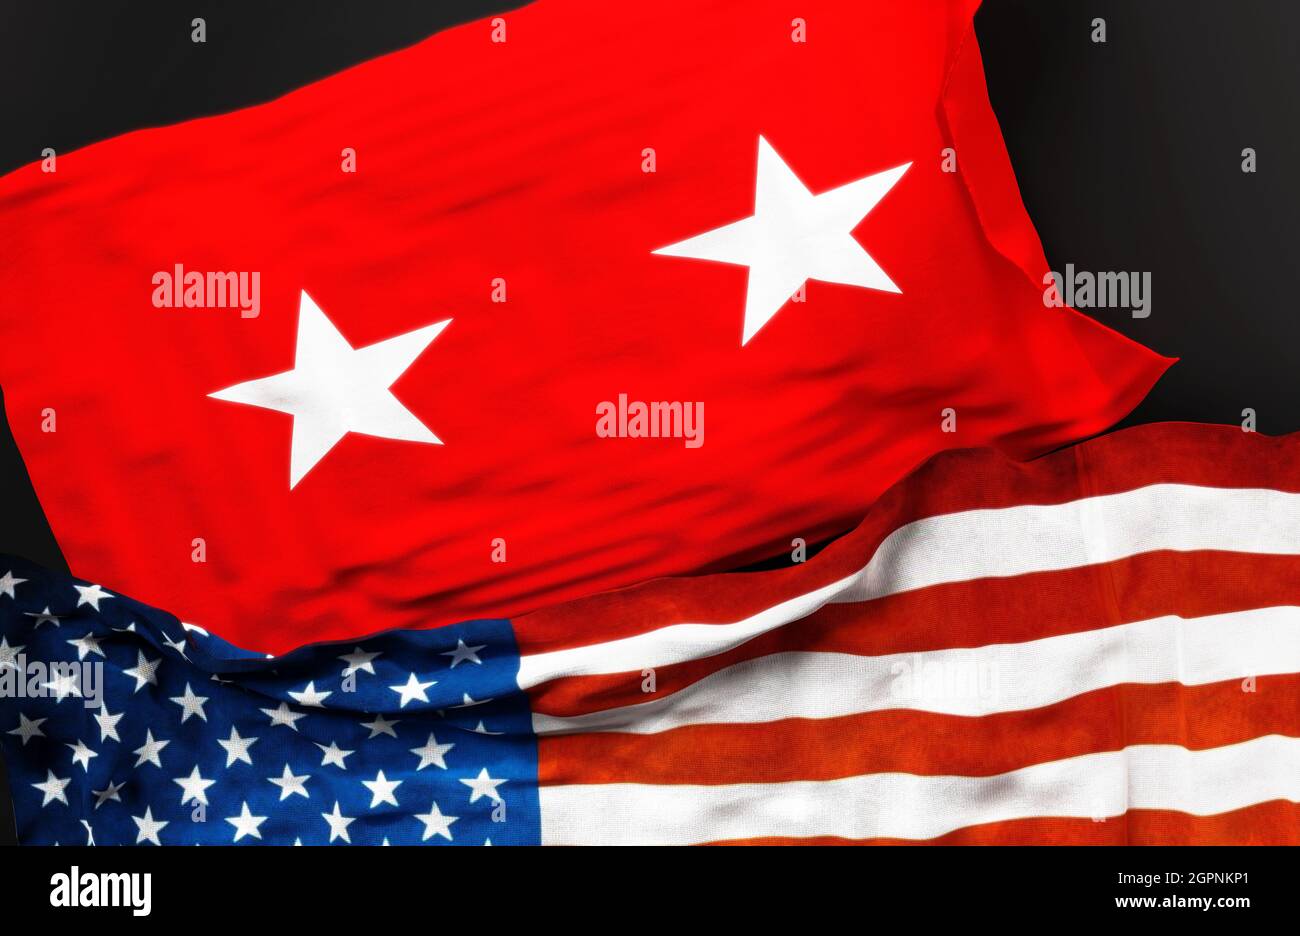 Flag of a United States Army major general along with a flag of the United States of America as a symbol of unity between them, 3d illustration Stock Photo